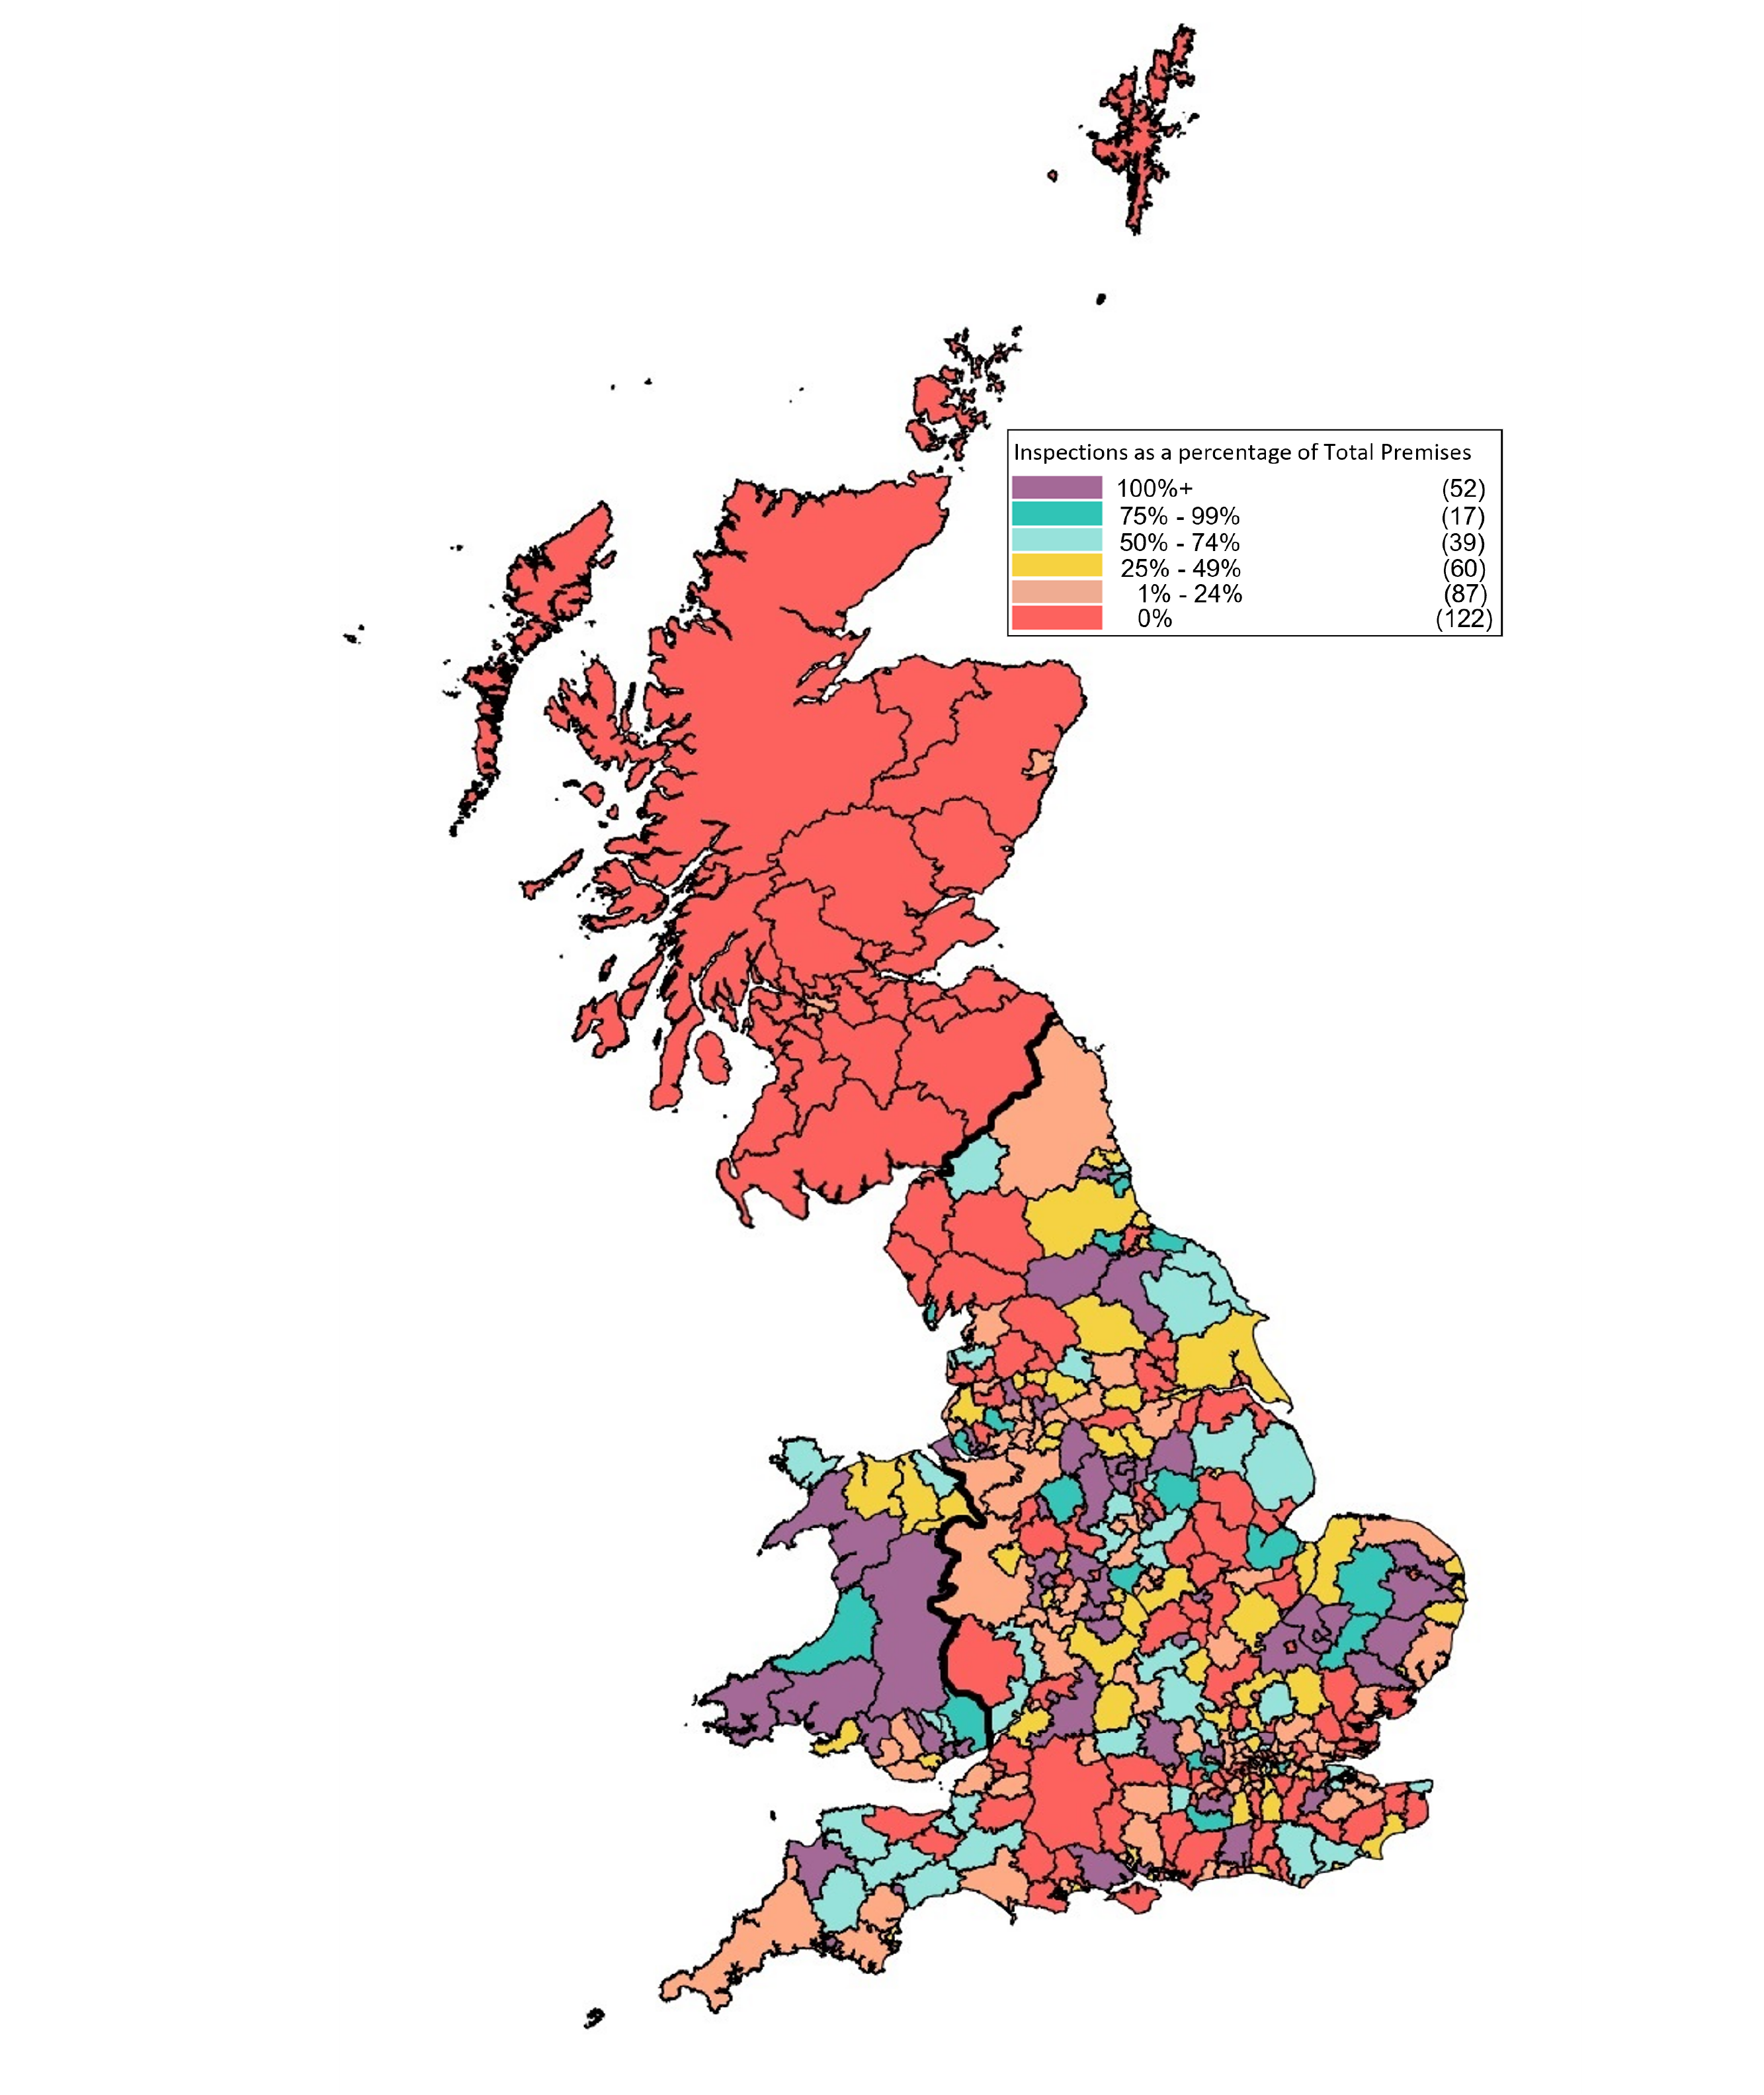 A map of local authority areas across Britain, showing that few compliance visits took place in 2018-19 in Scotland compared to England or Wales